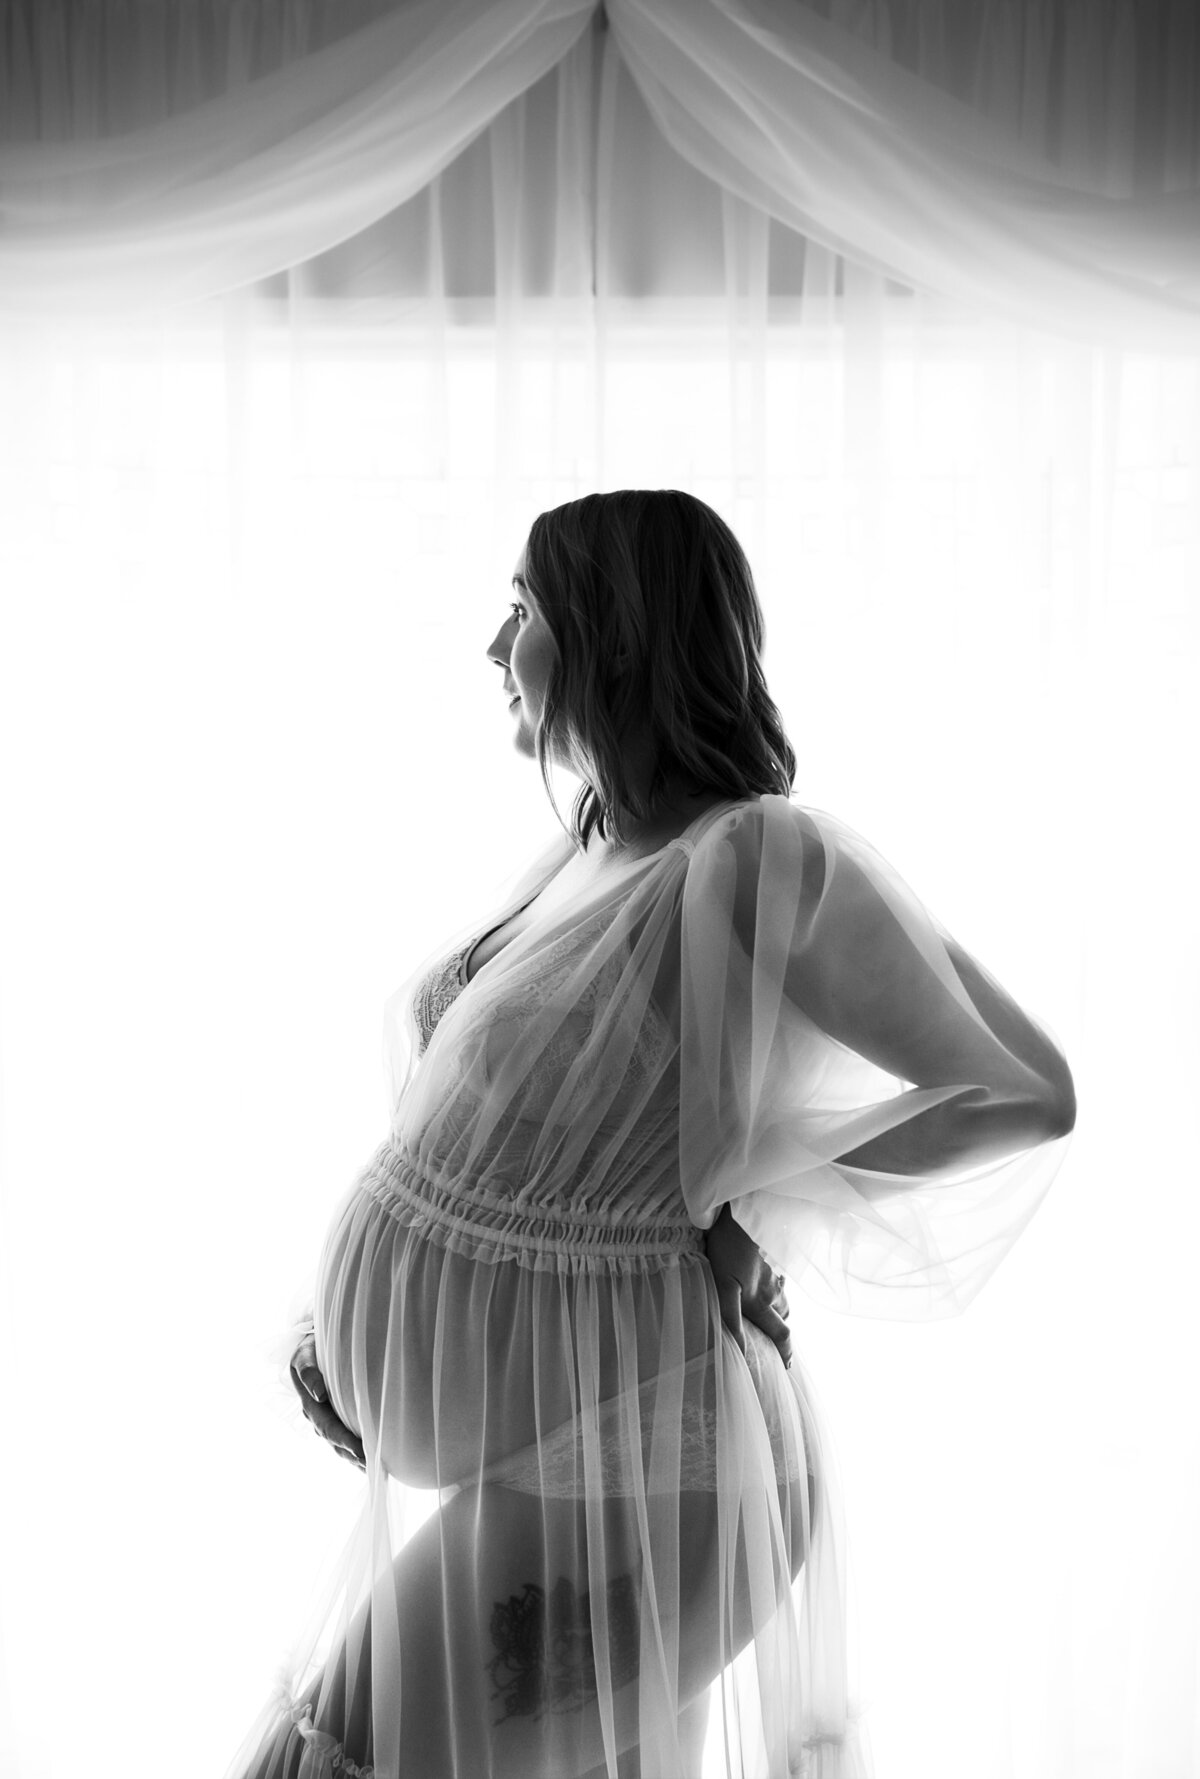 Black and white backlit photo of a pregnant woman in a sheer dress